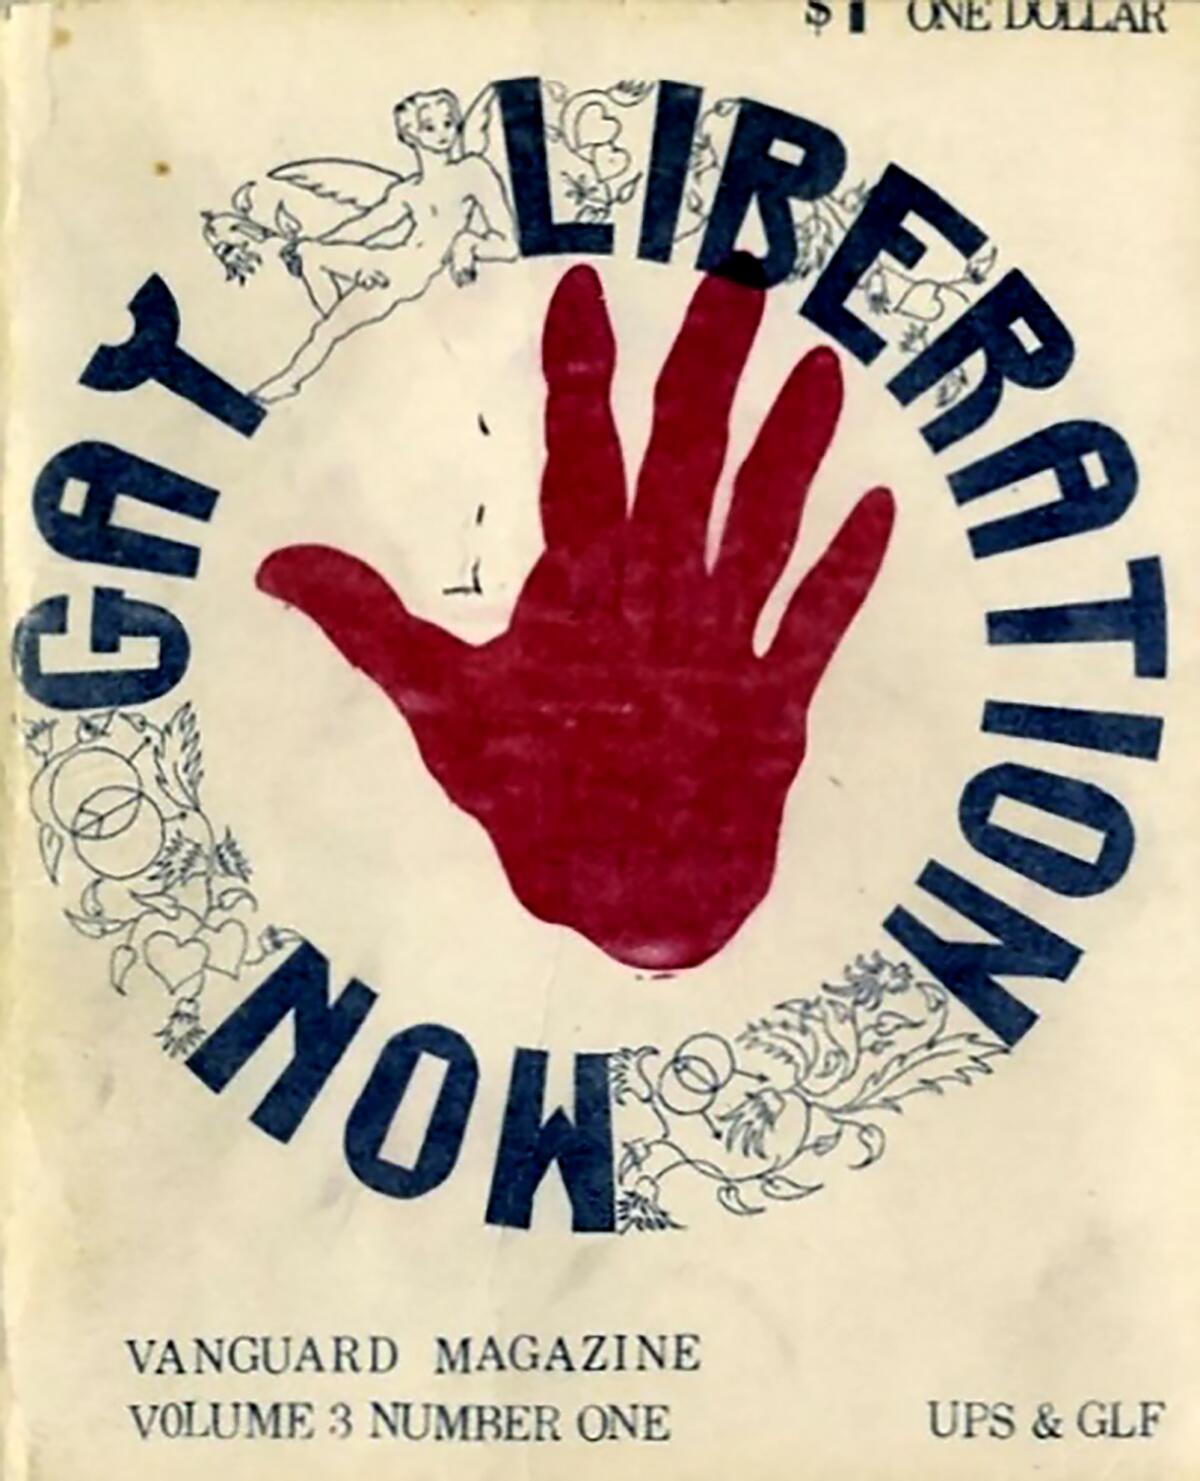 A purple handprint encircled by the words "Gay Liberation Now" on the cover of Vanguard Magazine.